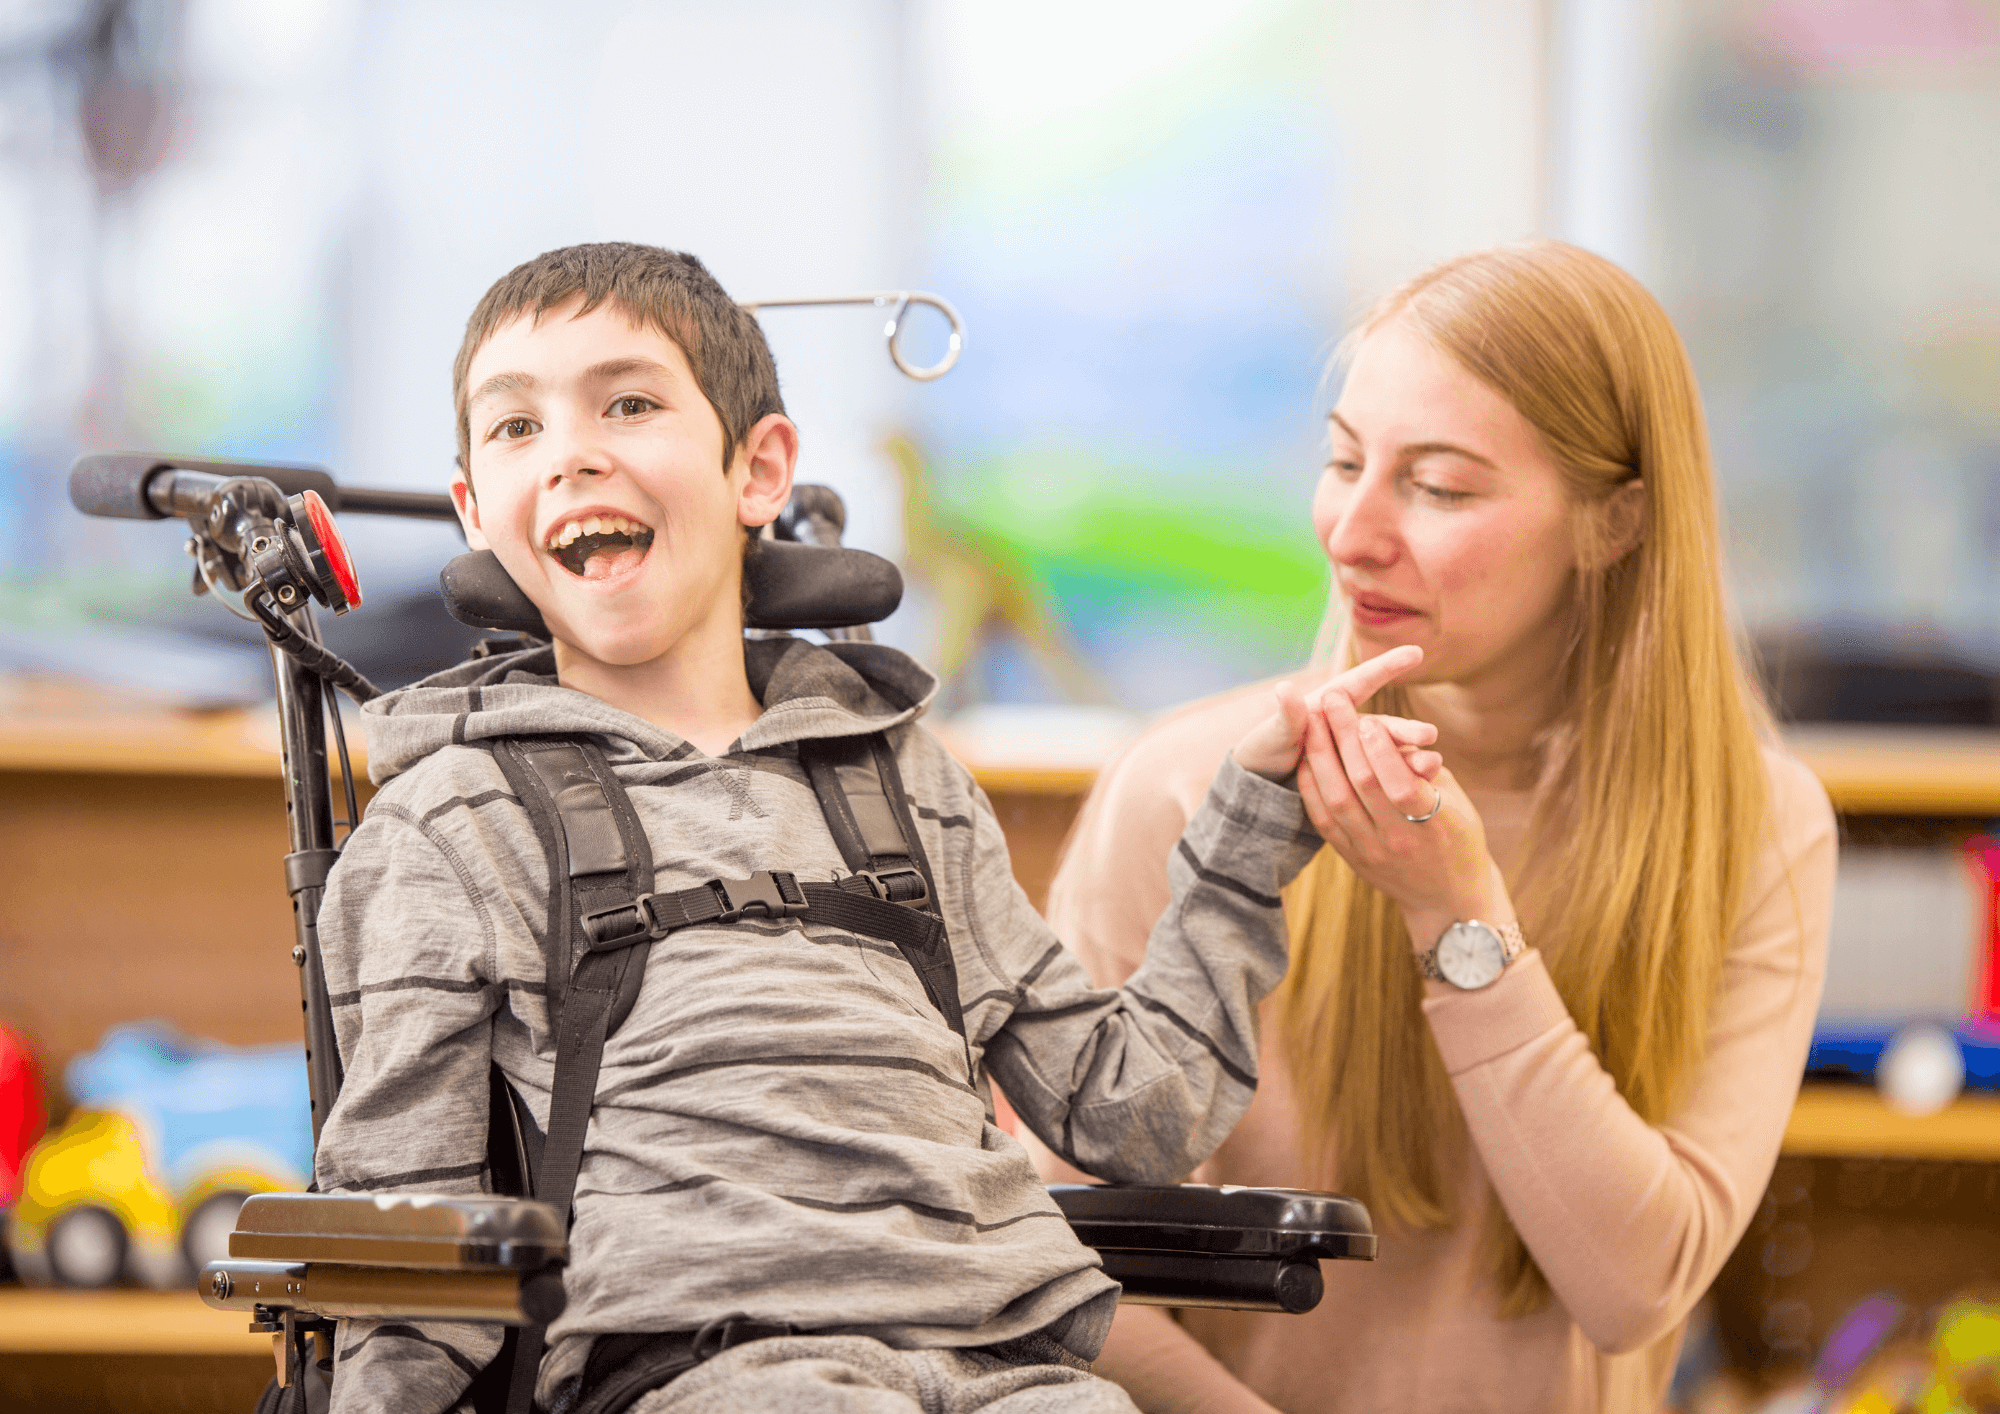 A boy strapped into a wheelchair with supporting headrest smiles with an adult close by in support.